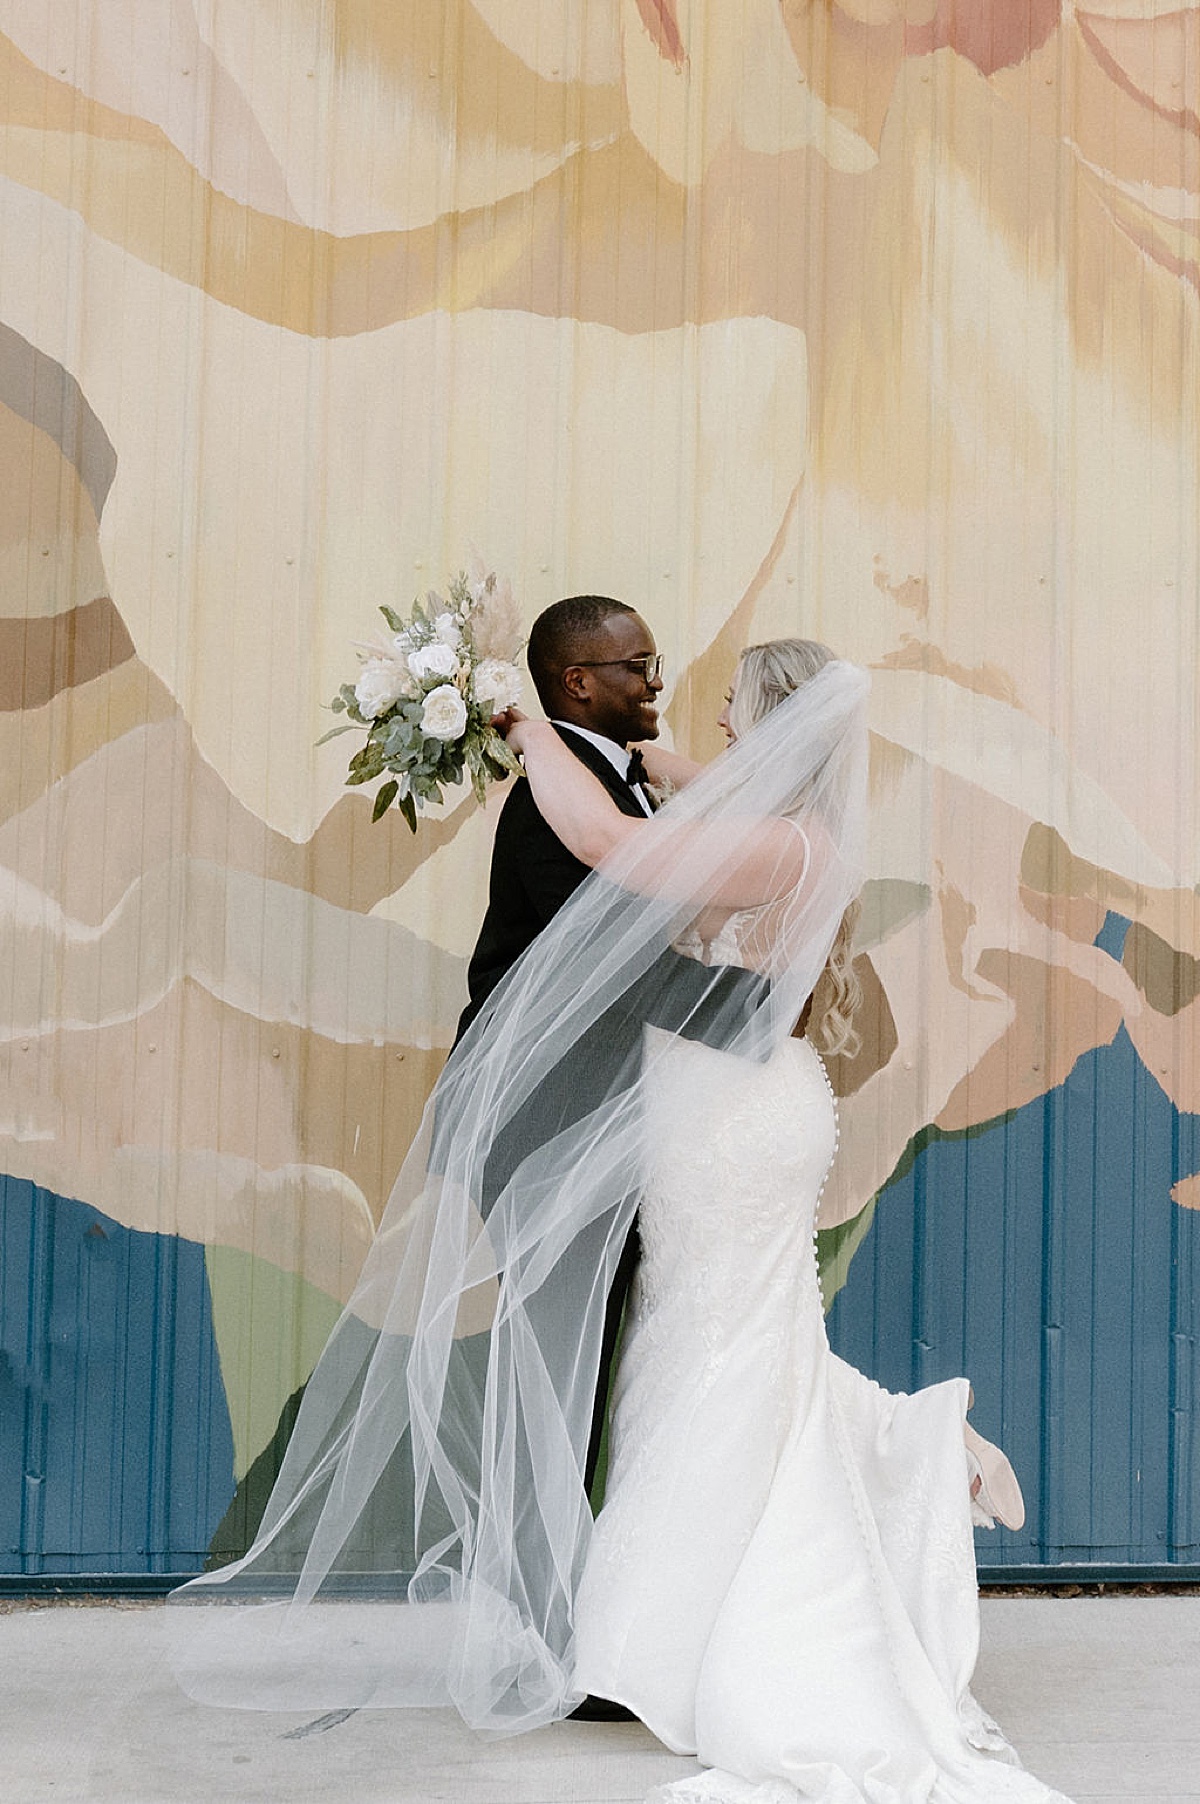 smiling groom embraces bride in elegant lace and satin gown as they pose in front of colorful mural after sunny Paper Mills ceremony